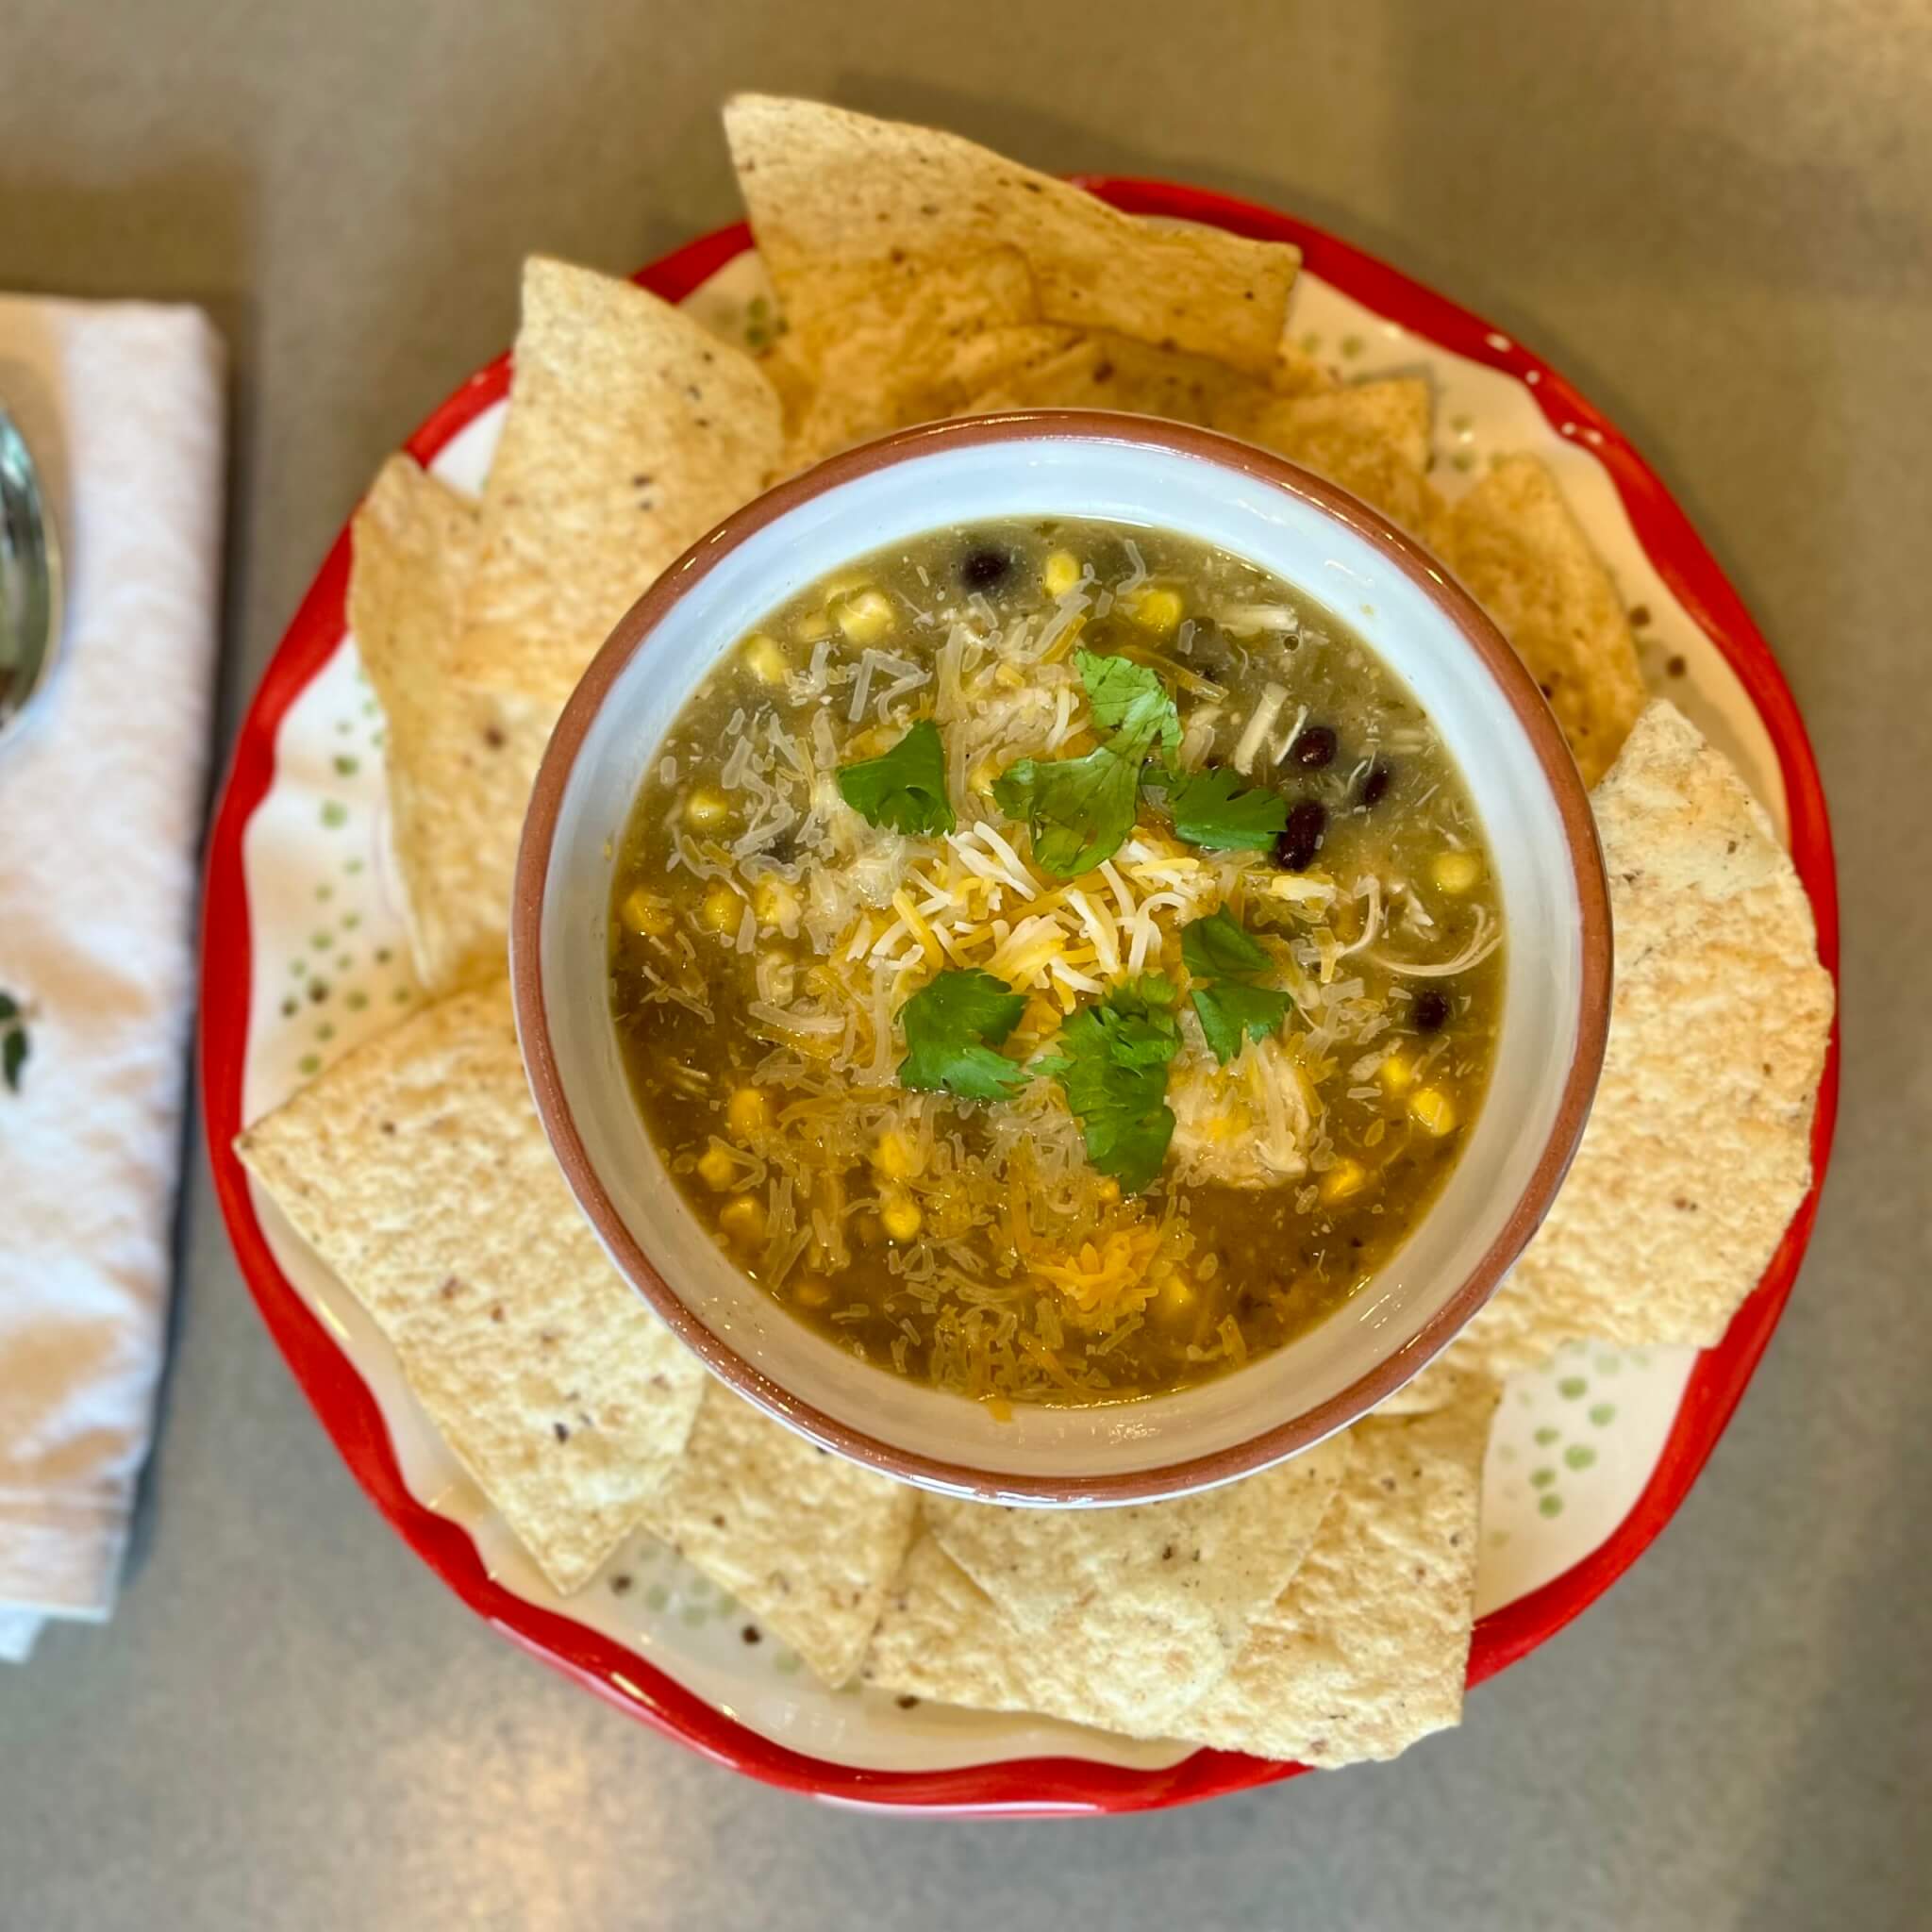 A bowl of chicken tortilla soup, surrounded by tortilla chips